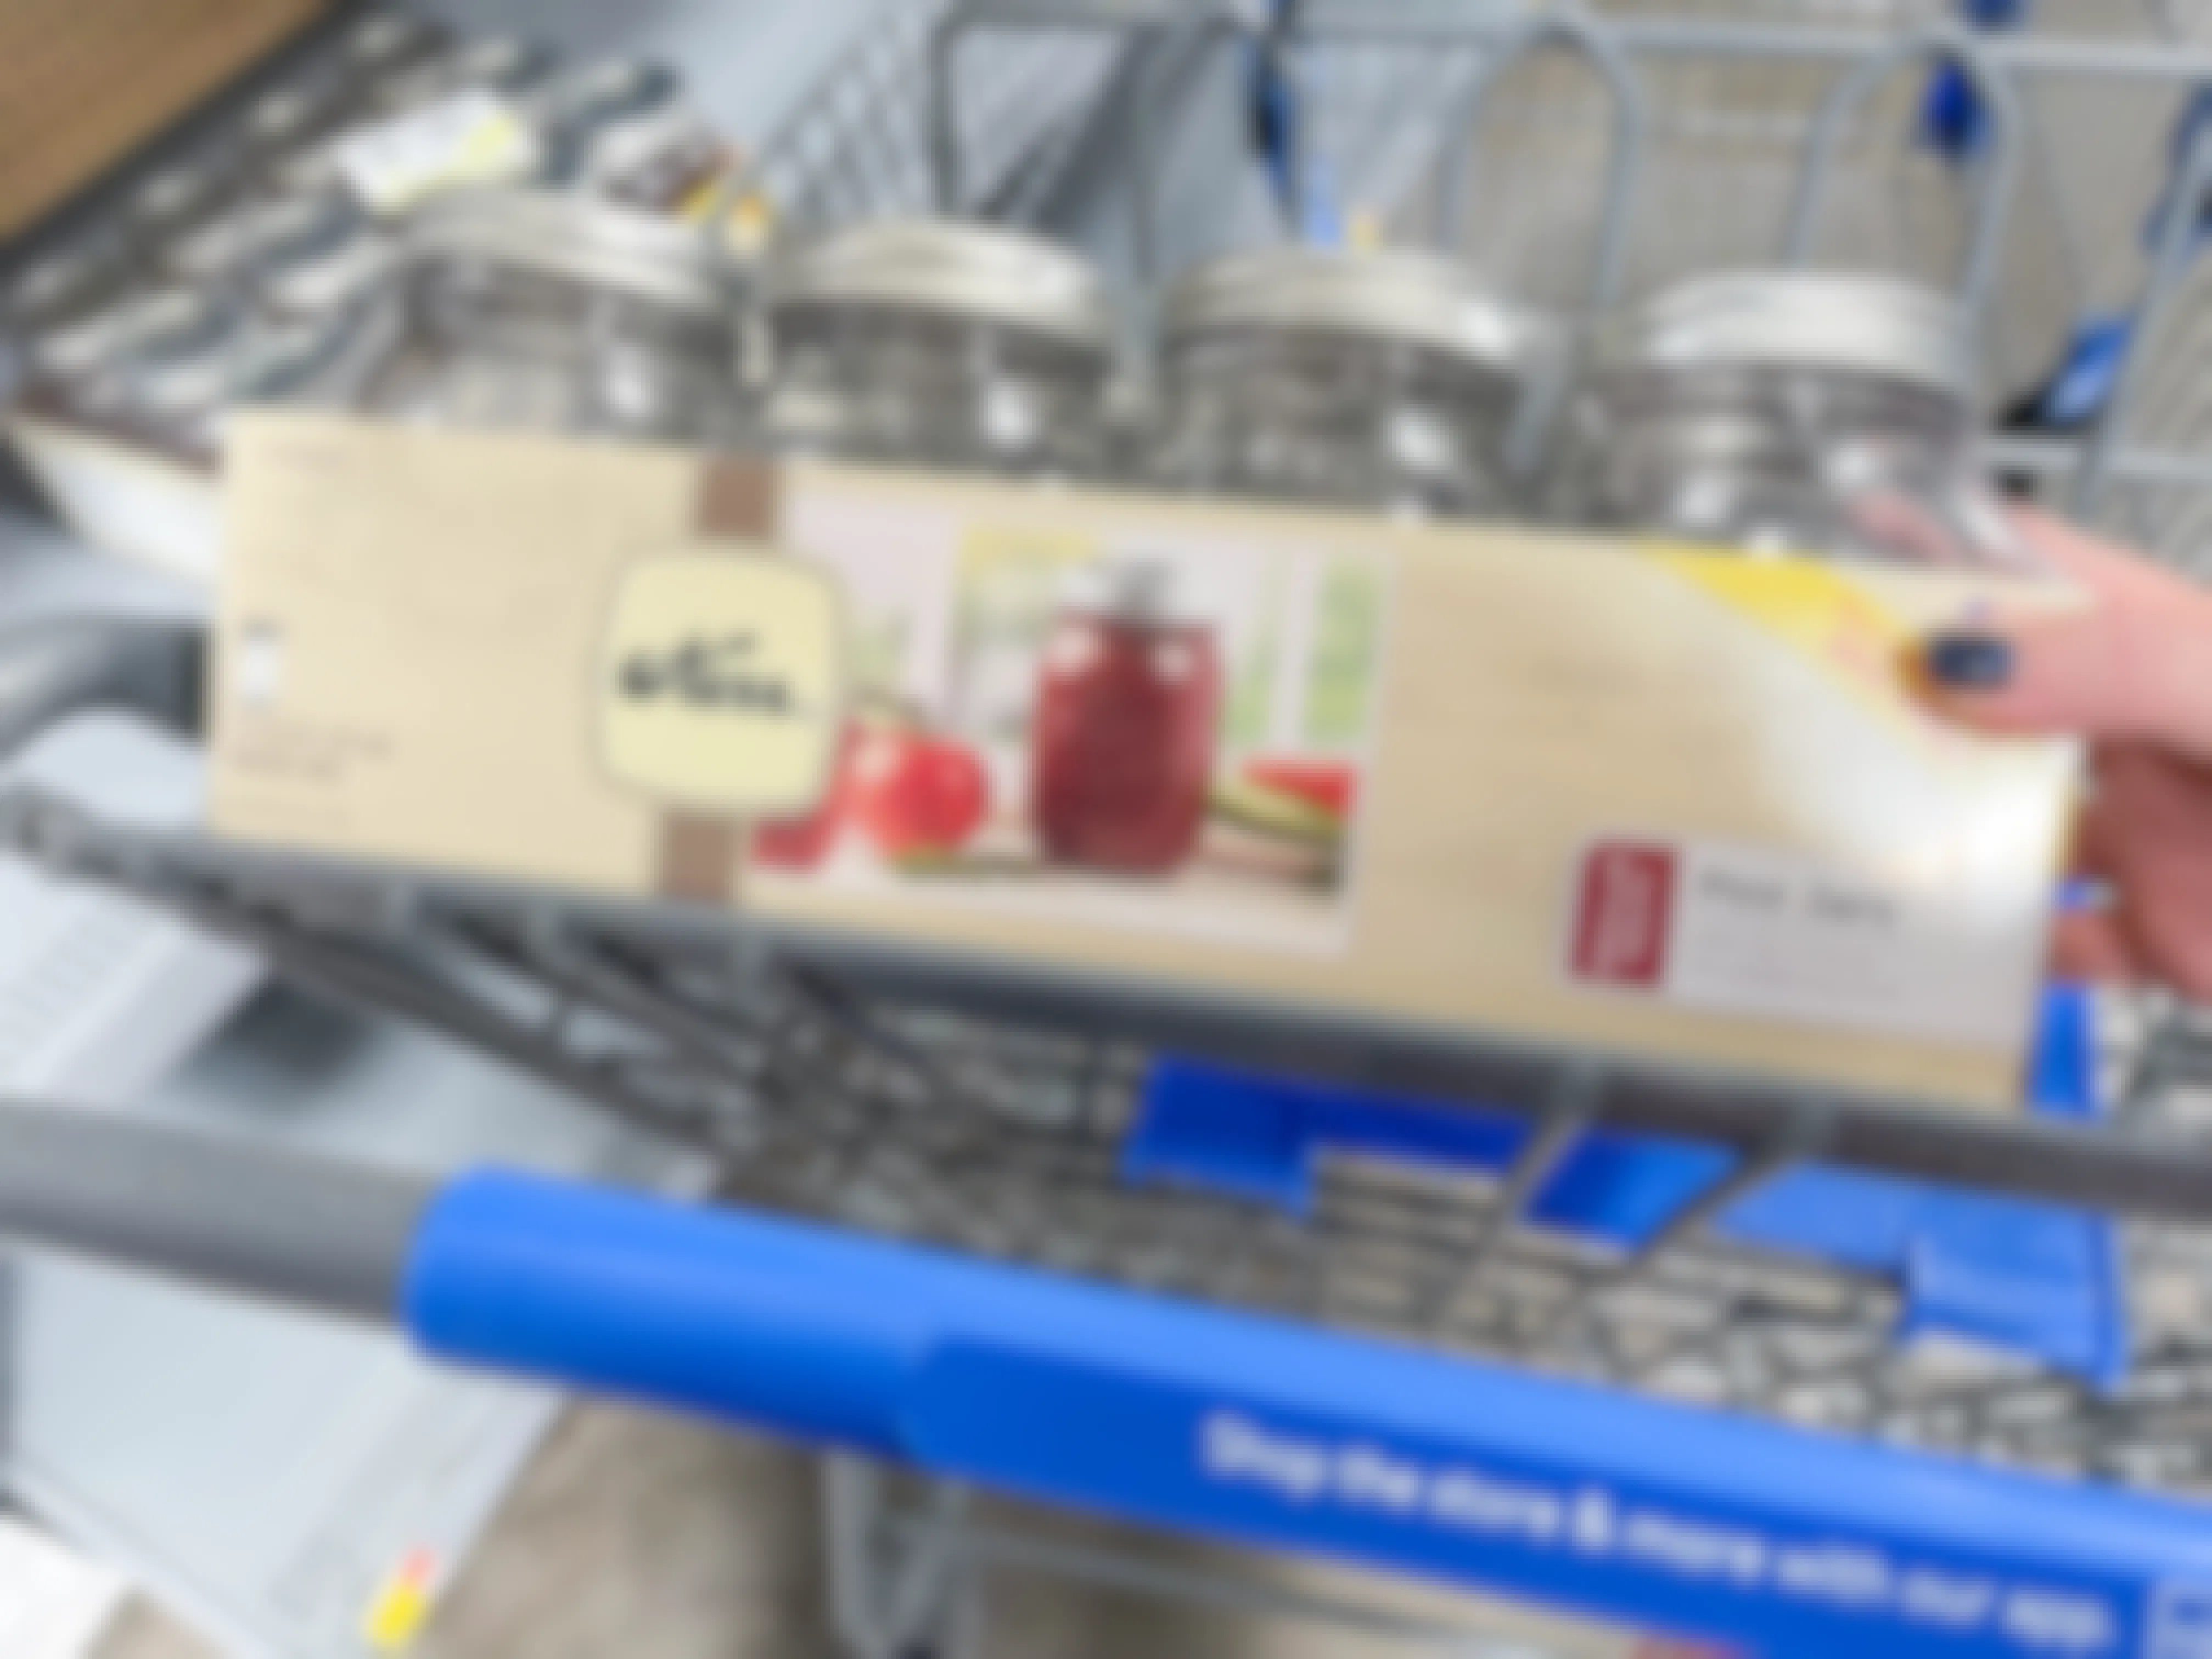 A case of Kerr canning jars being placed into a Walmart shopping cart basket.